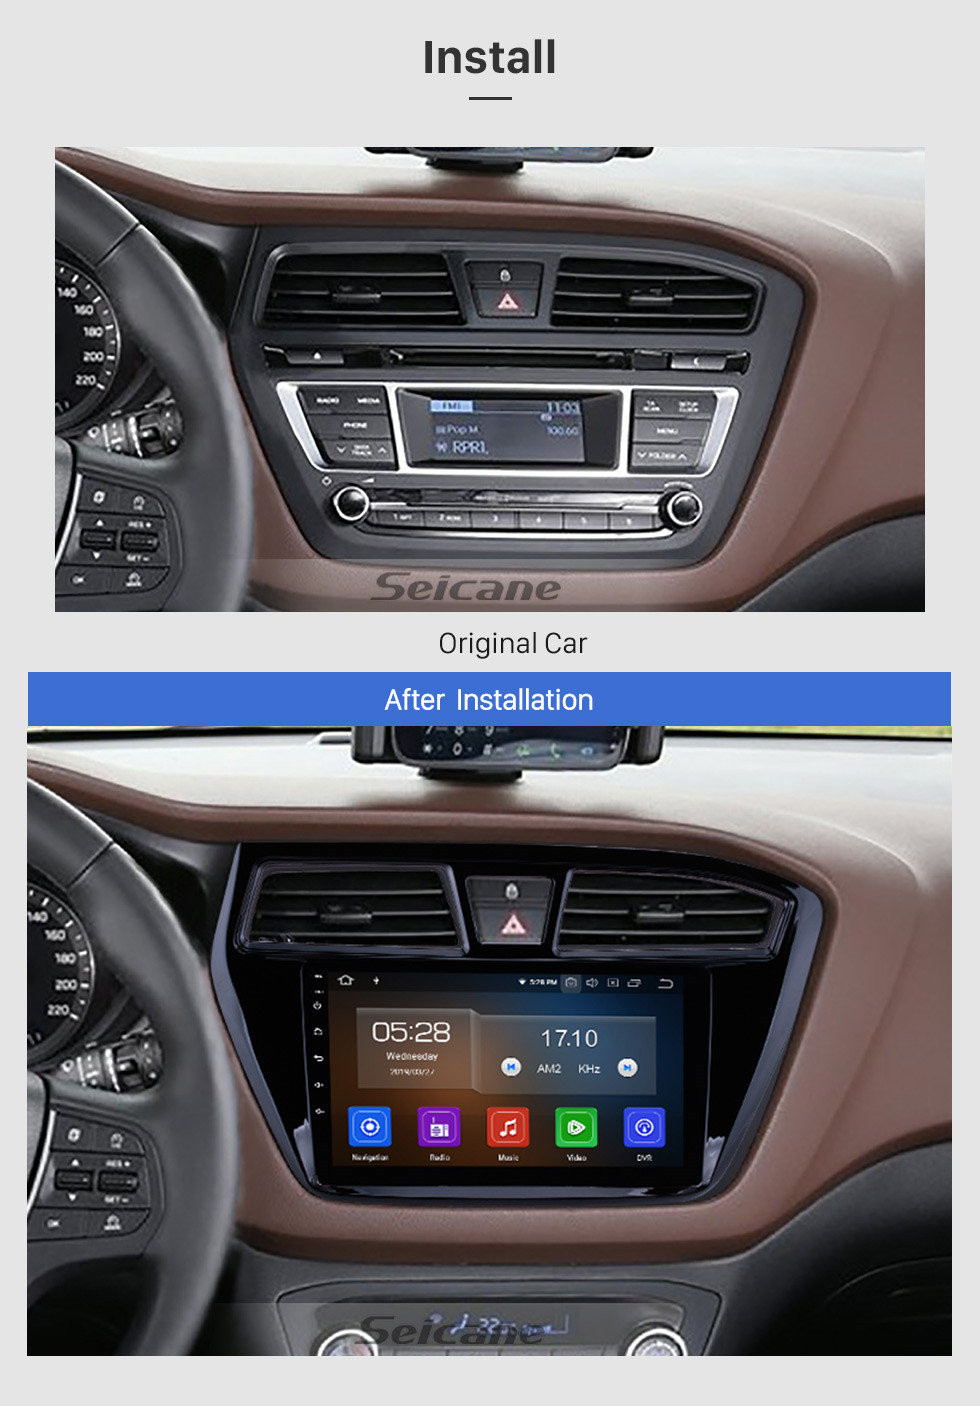 Seicane Aftermarket Android 11.0 navigation system Radio for 2014 2015 Hyundai i20 with Mirror link GPS HD 1024*600 touch screen OBD2 DVR Rearview camera TV 1080P Video 3G WIFI Steering Wheel Control Bluetooth USB SD